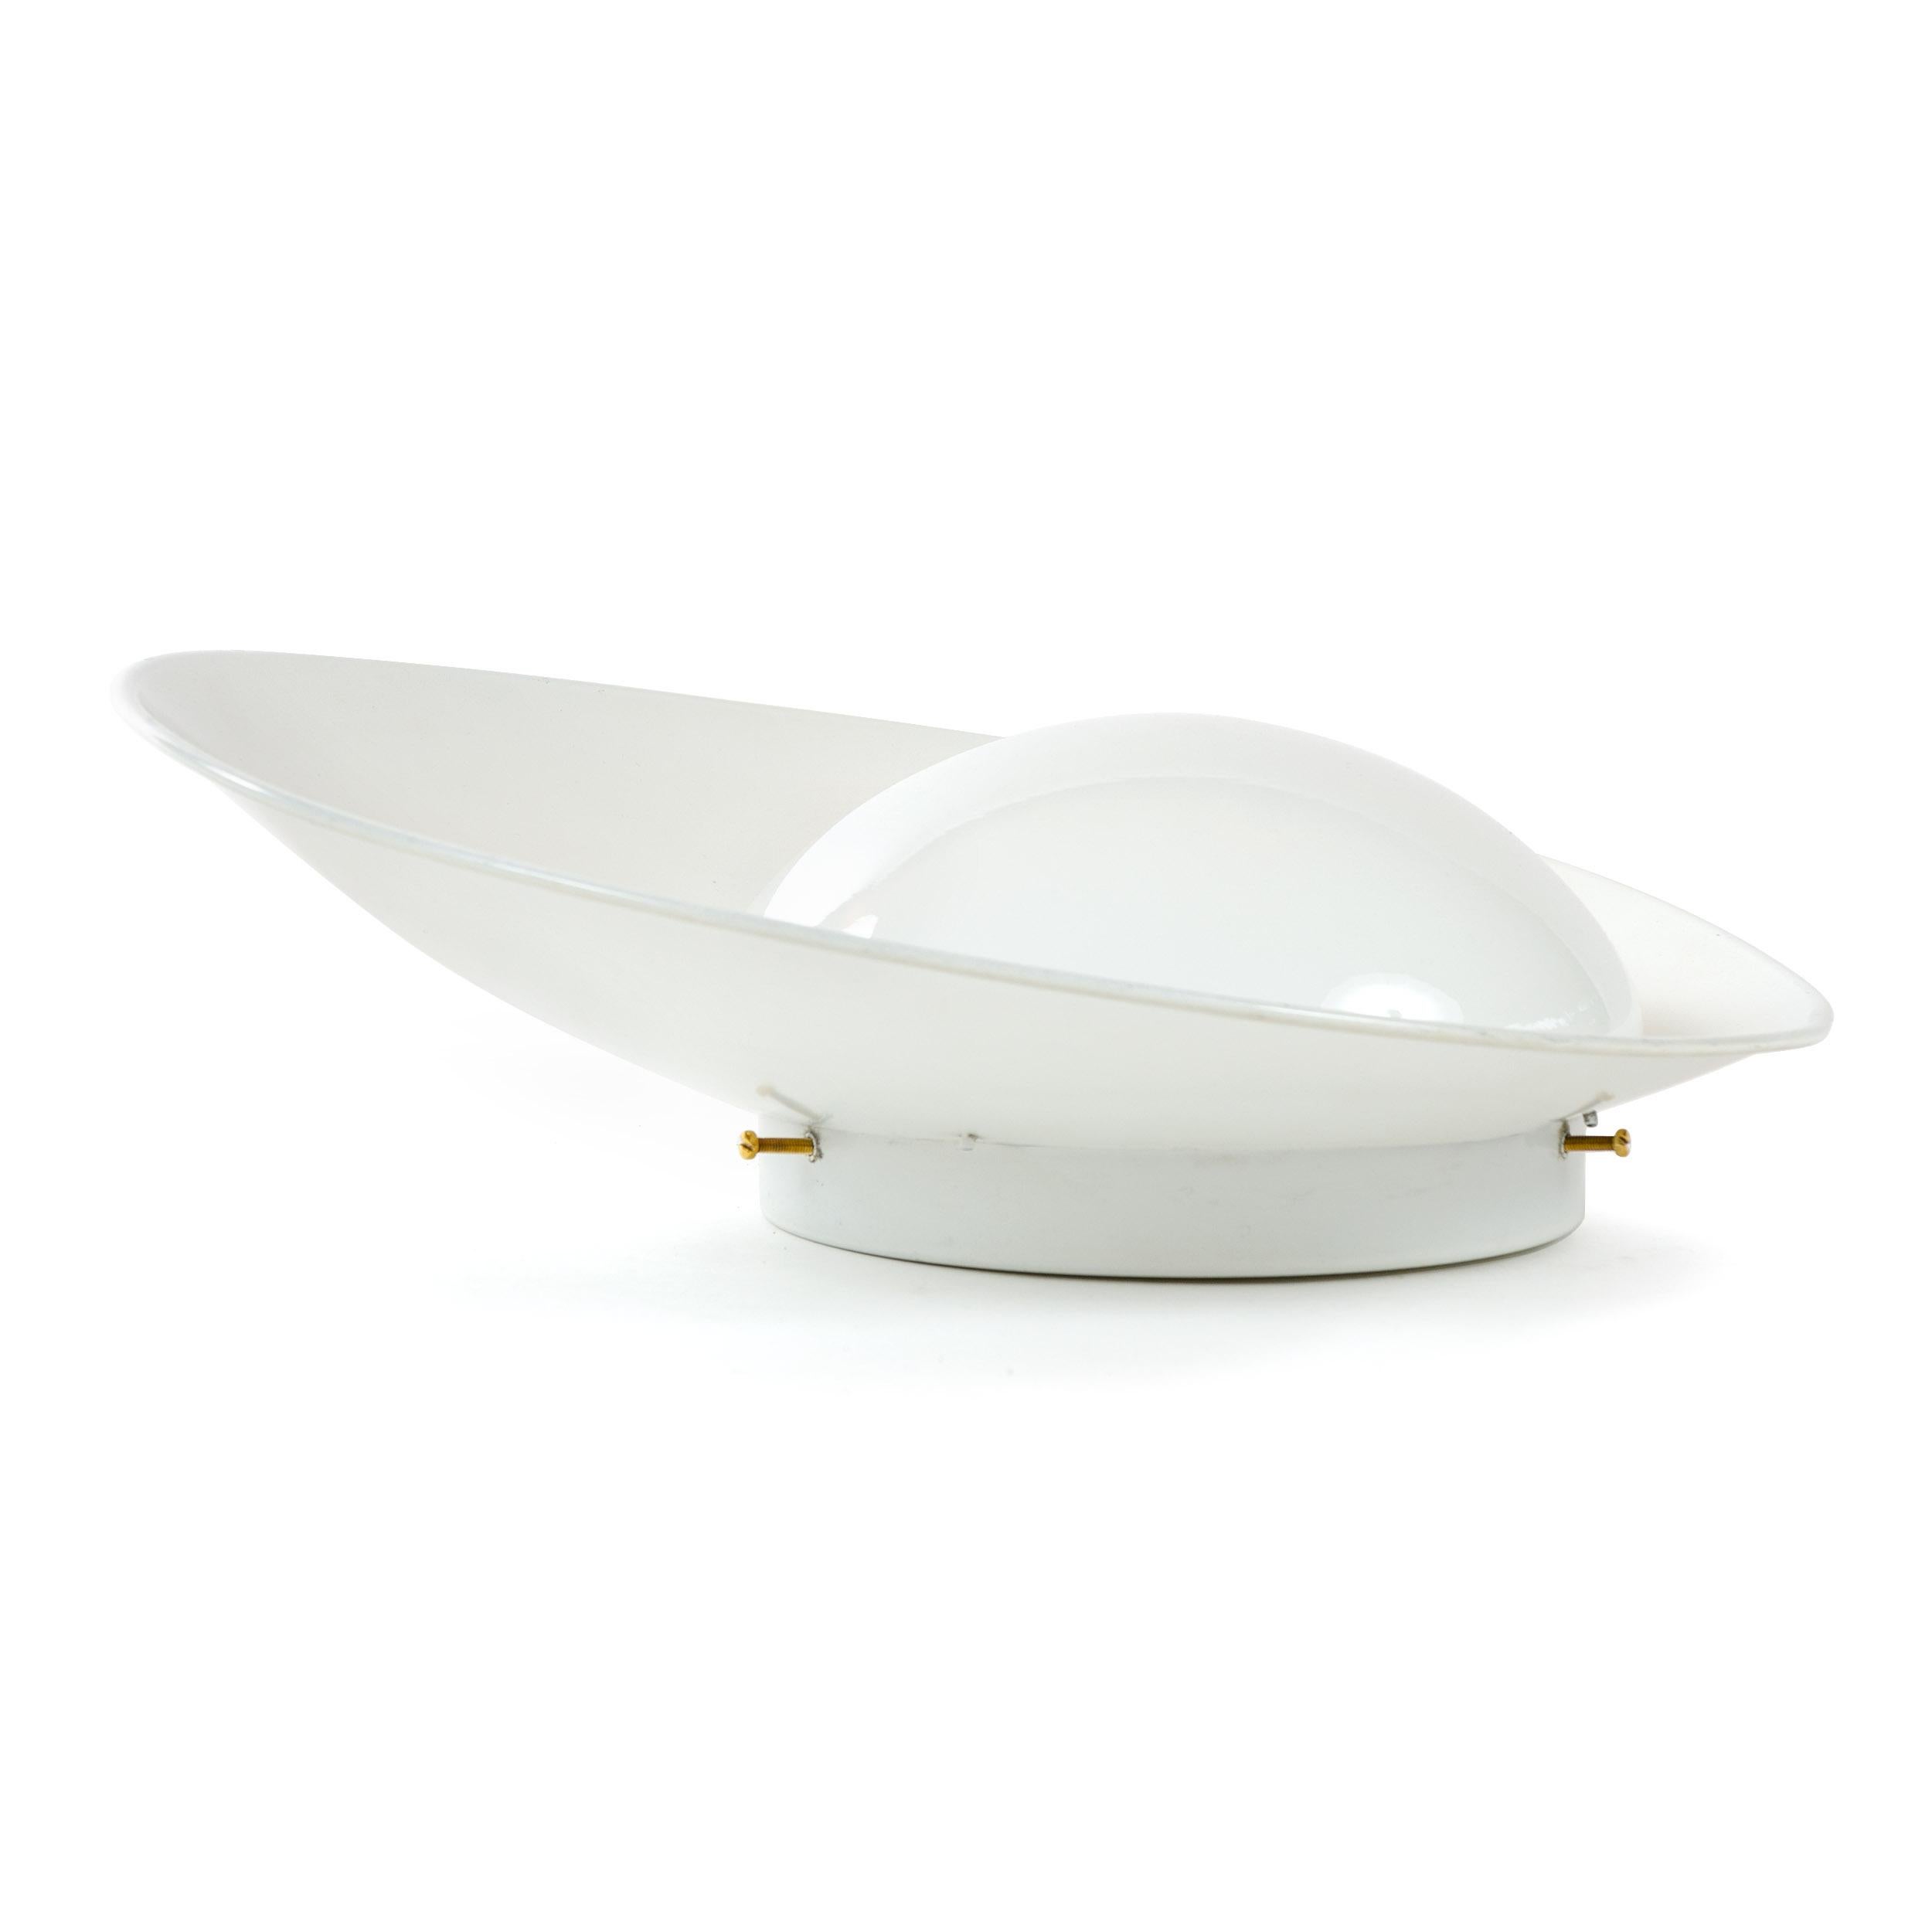 A wall sconce having a half globe crowned by a white lacquered asymmetrically angled shade.